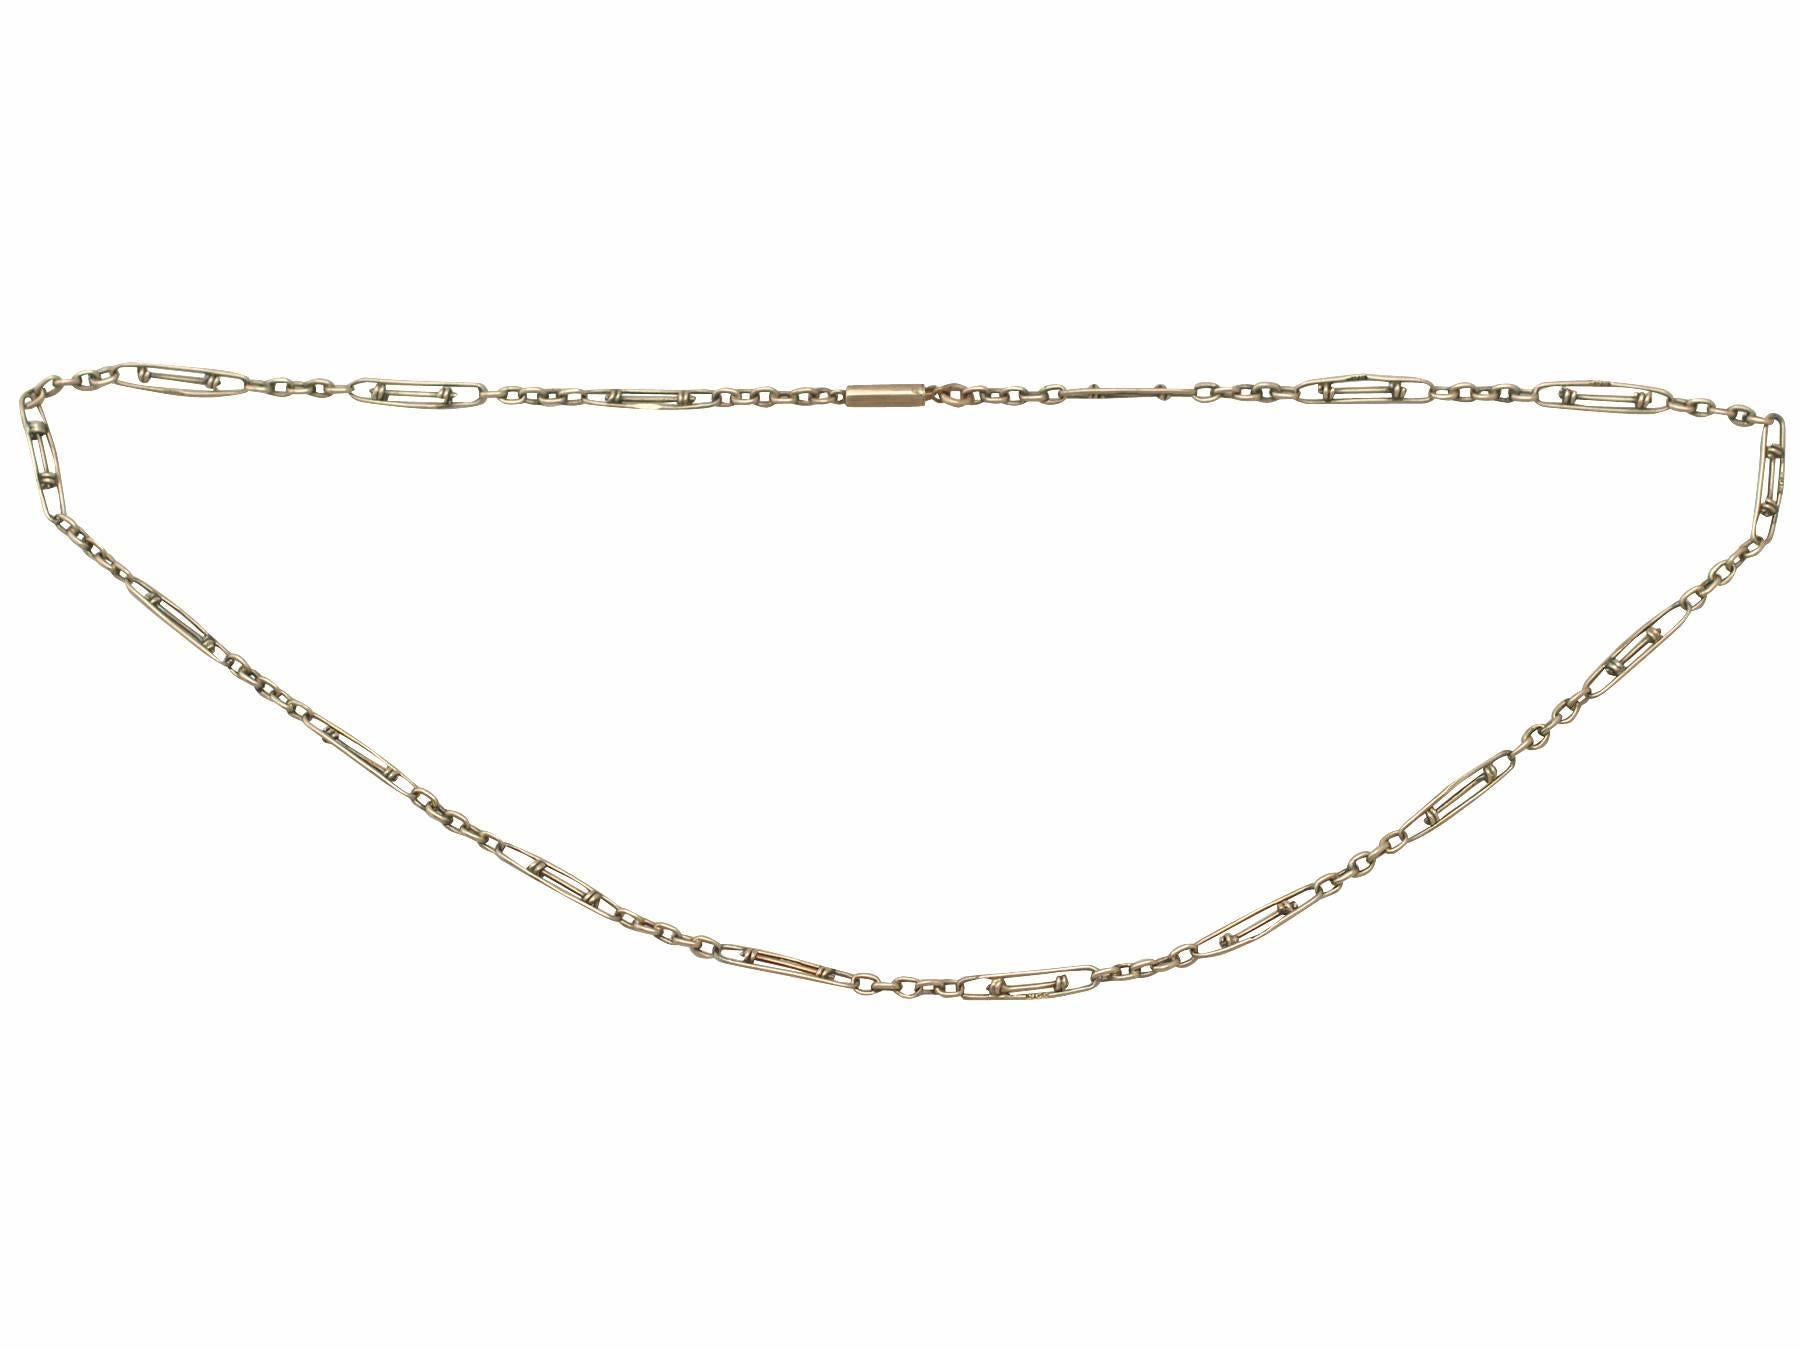 A fine and impressive antique 9 karat yellow gold fancy figaro necklace chain; part of our diverse antique jewellery and estate jewelry collections

This fine and impressive antique necklace chain has been crafted in 9k yellow gold.

The Figaro